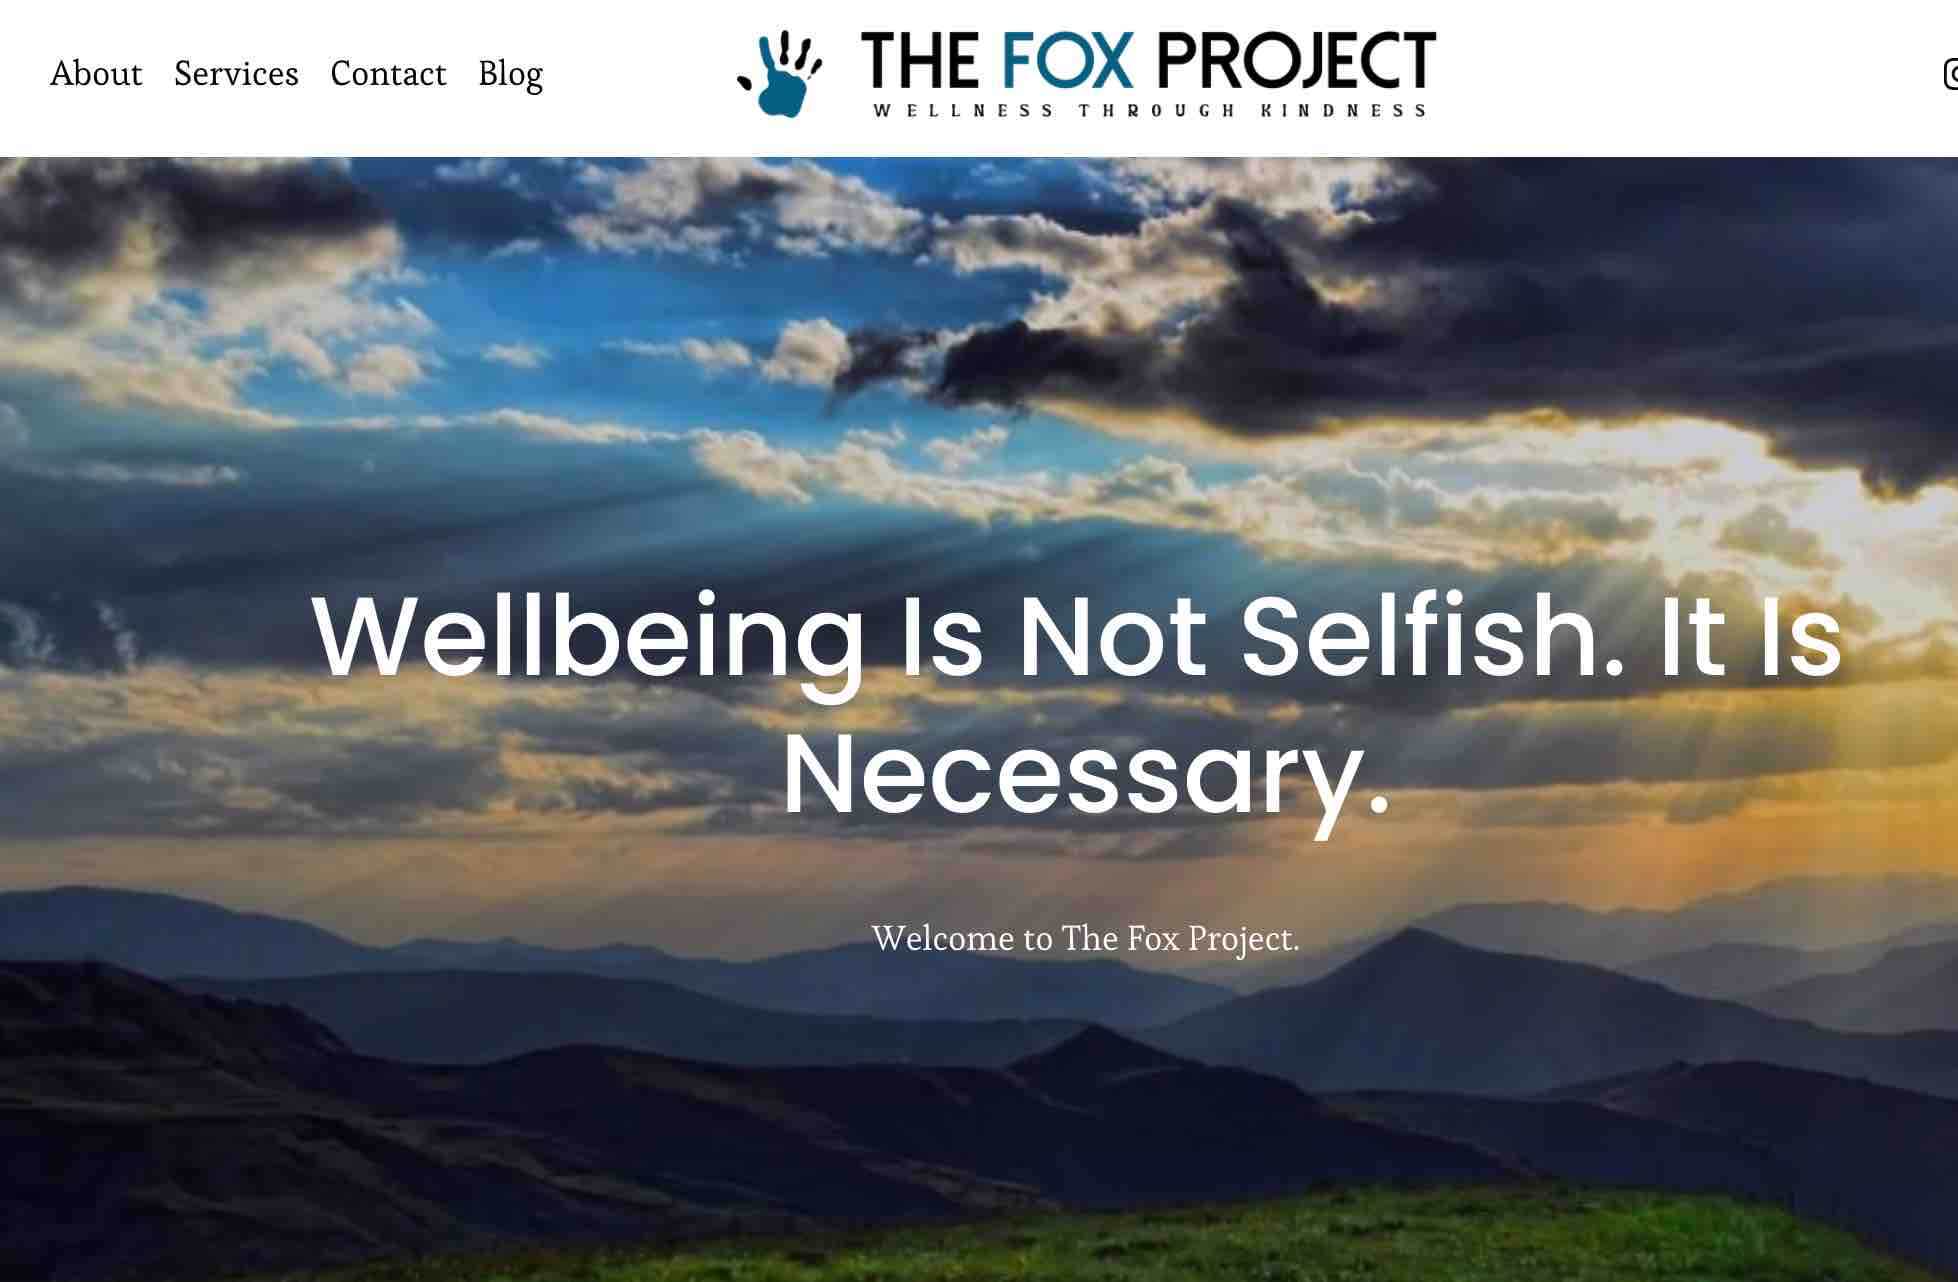 The Fox Project web site